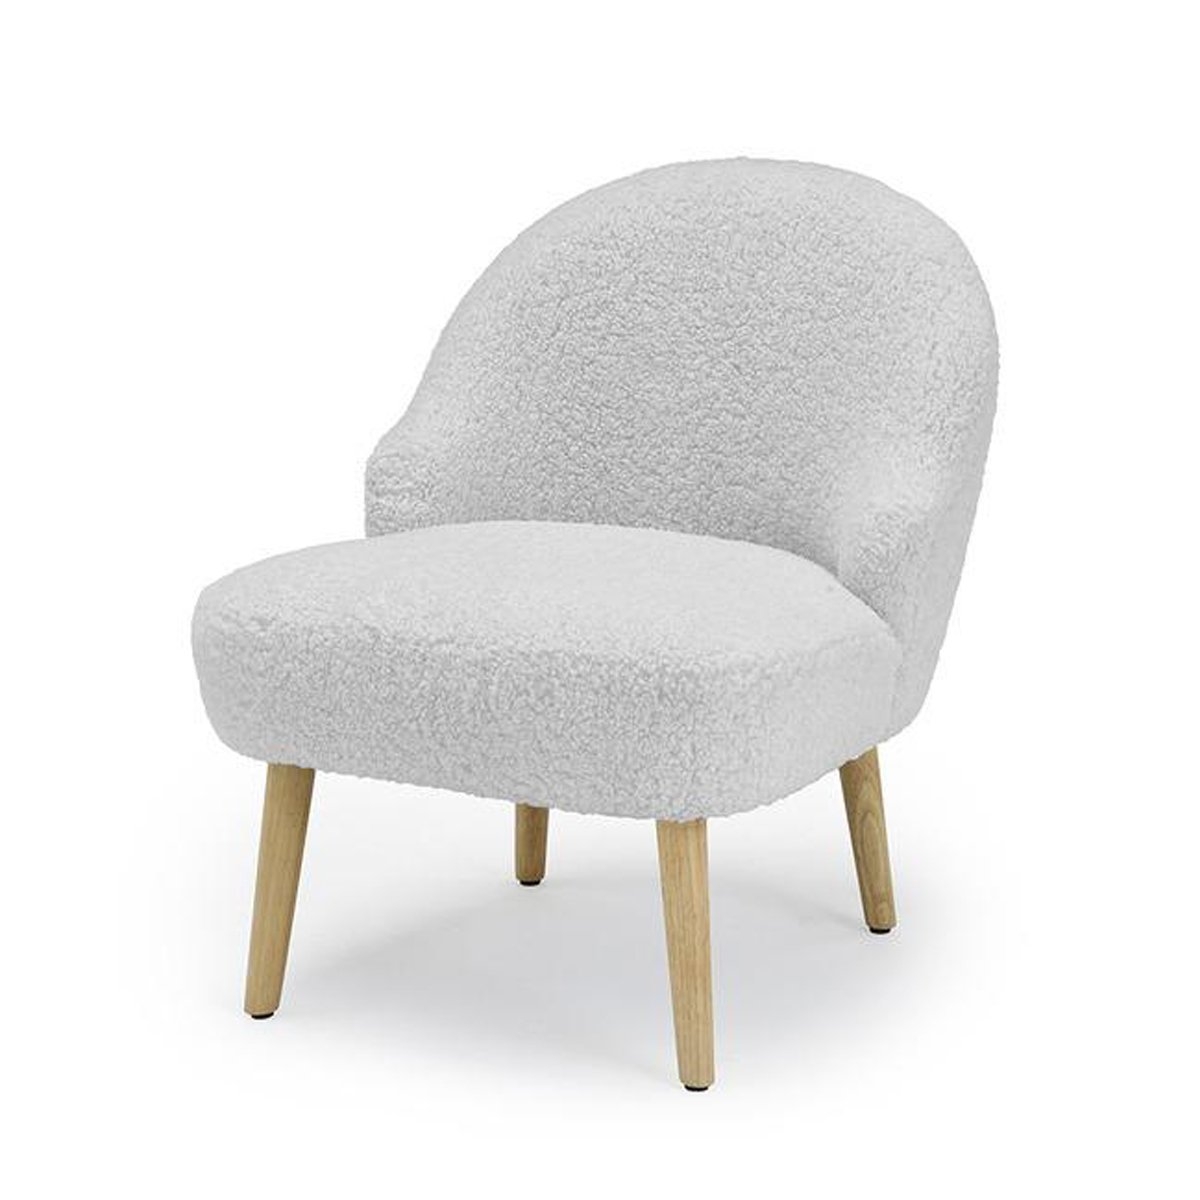 Soft Fluffy Teddy Arm Chair In White Or Grey Grey – By CGC Interiors